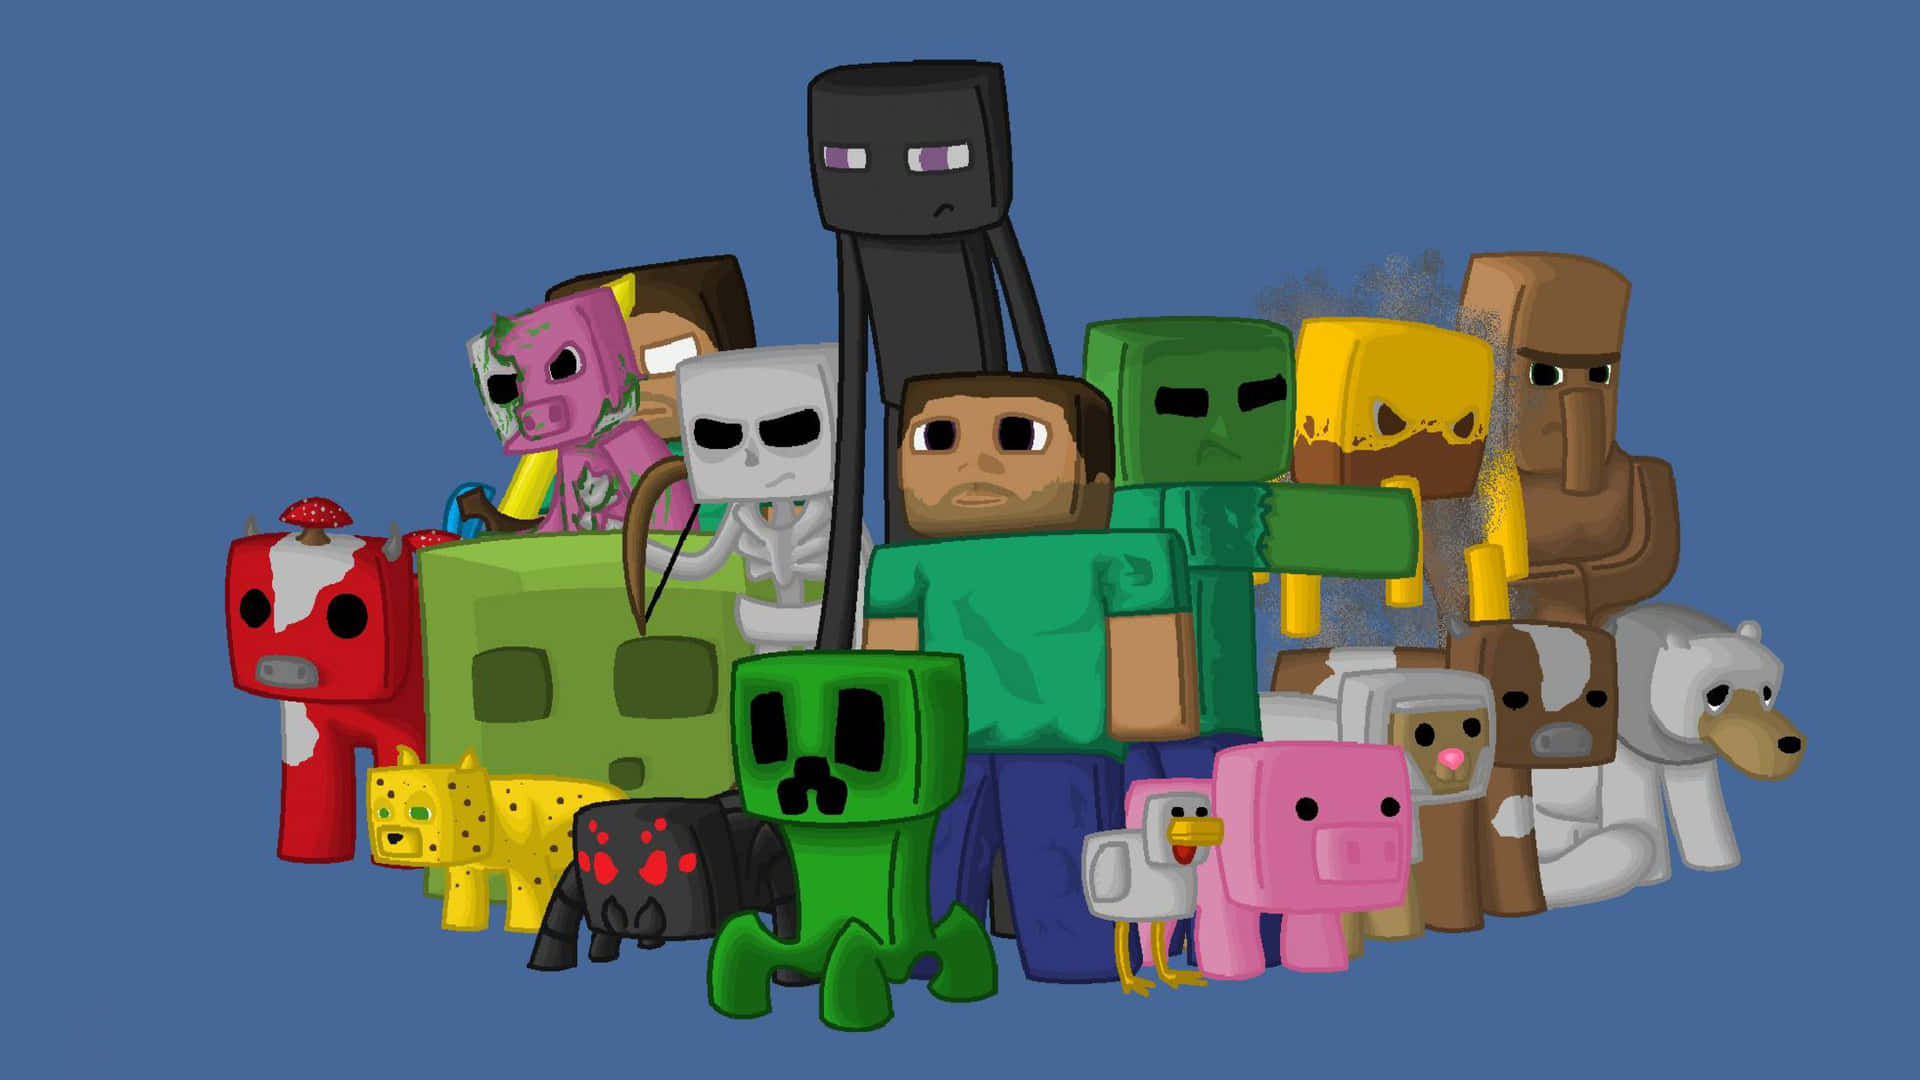 Create your own digital world with Cute Minecraft Wallpaper